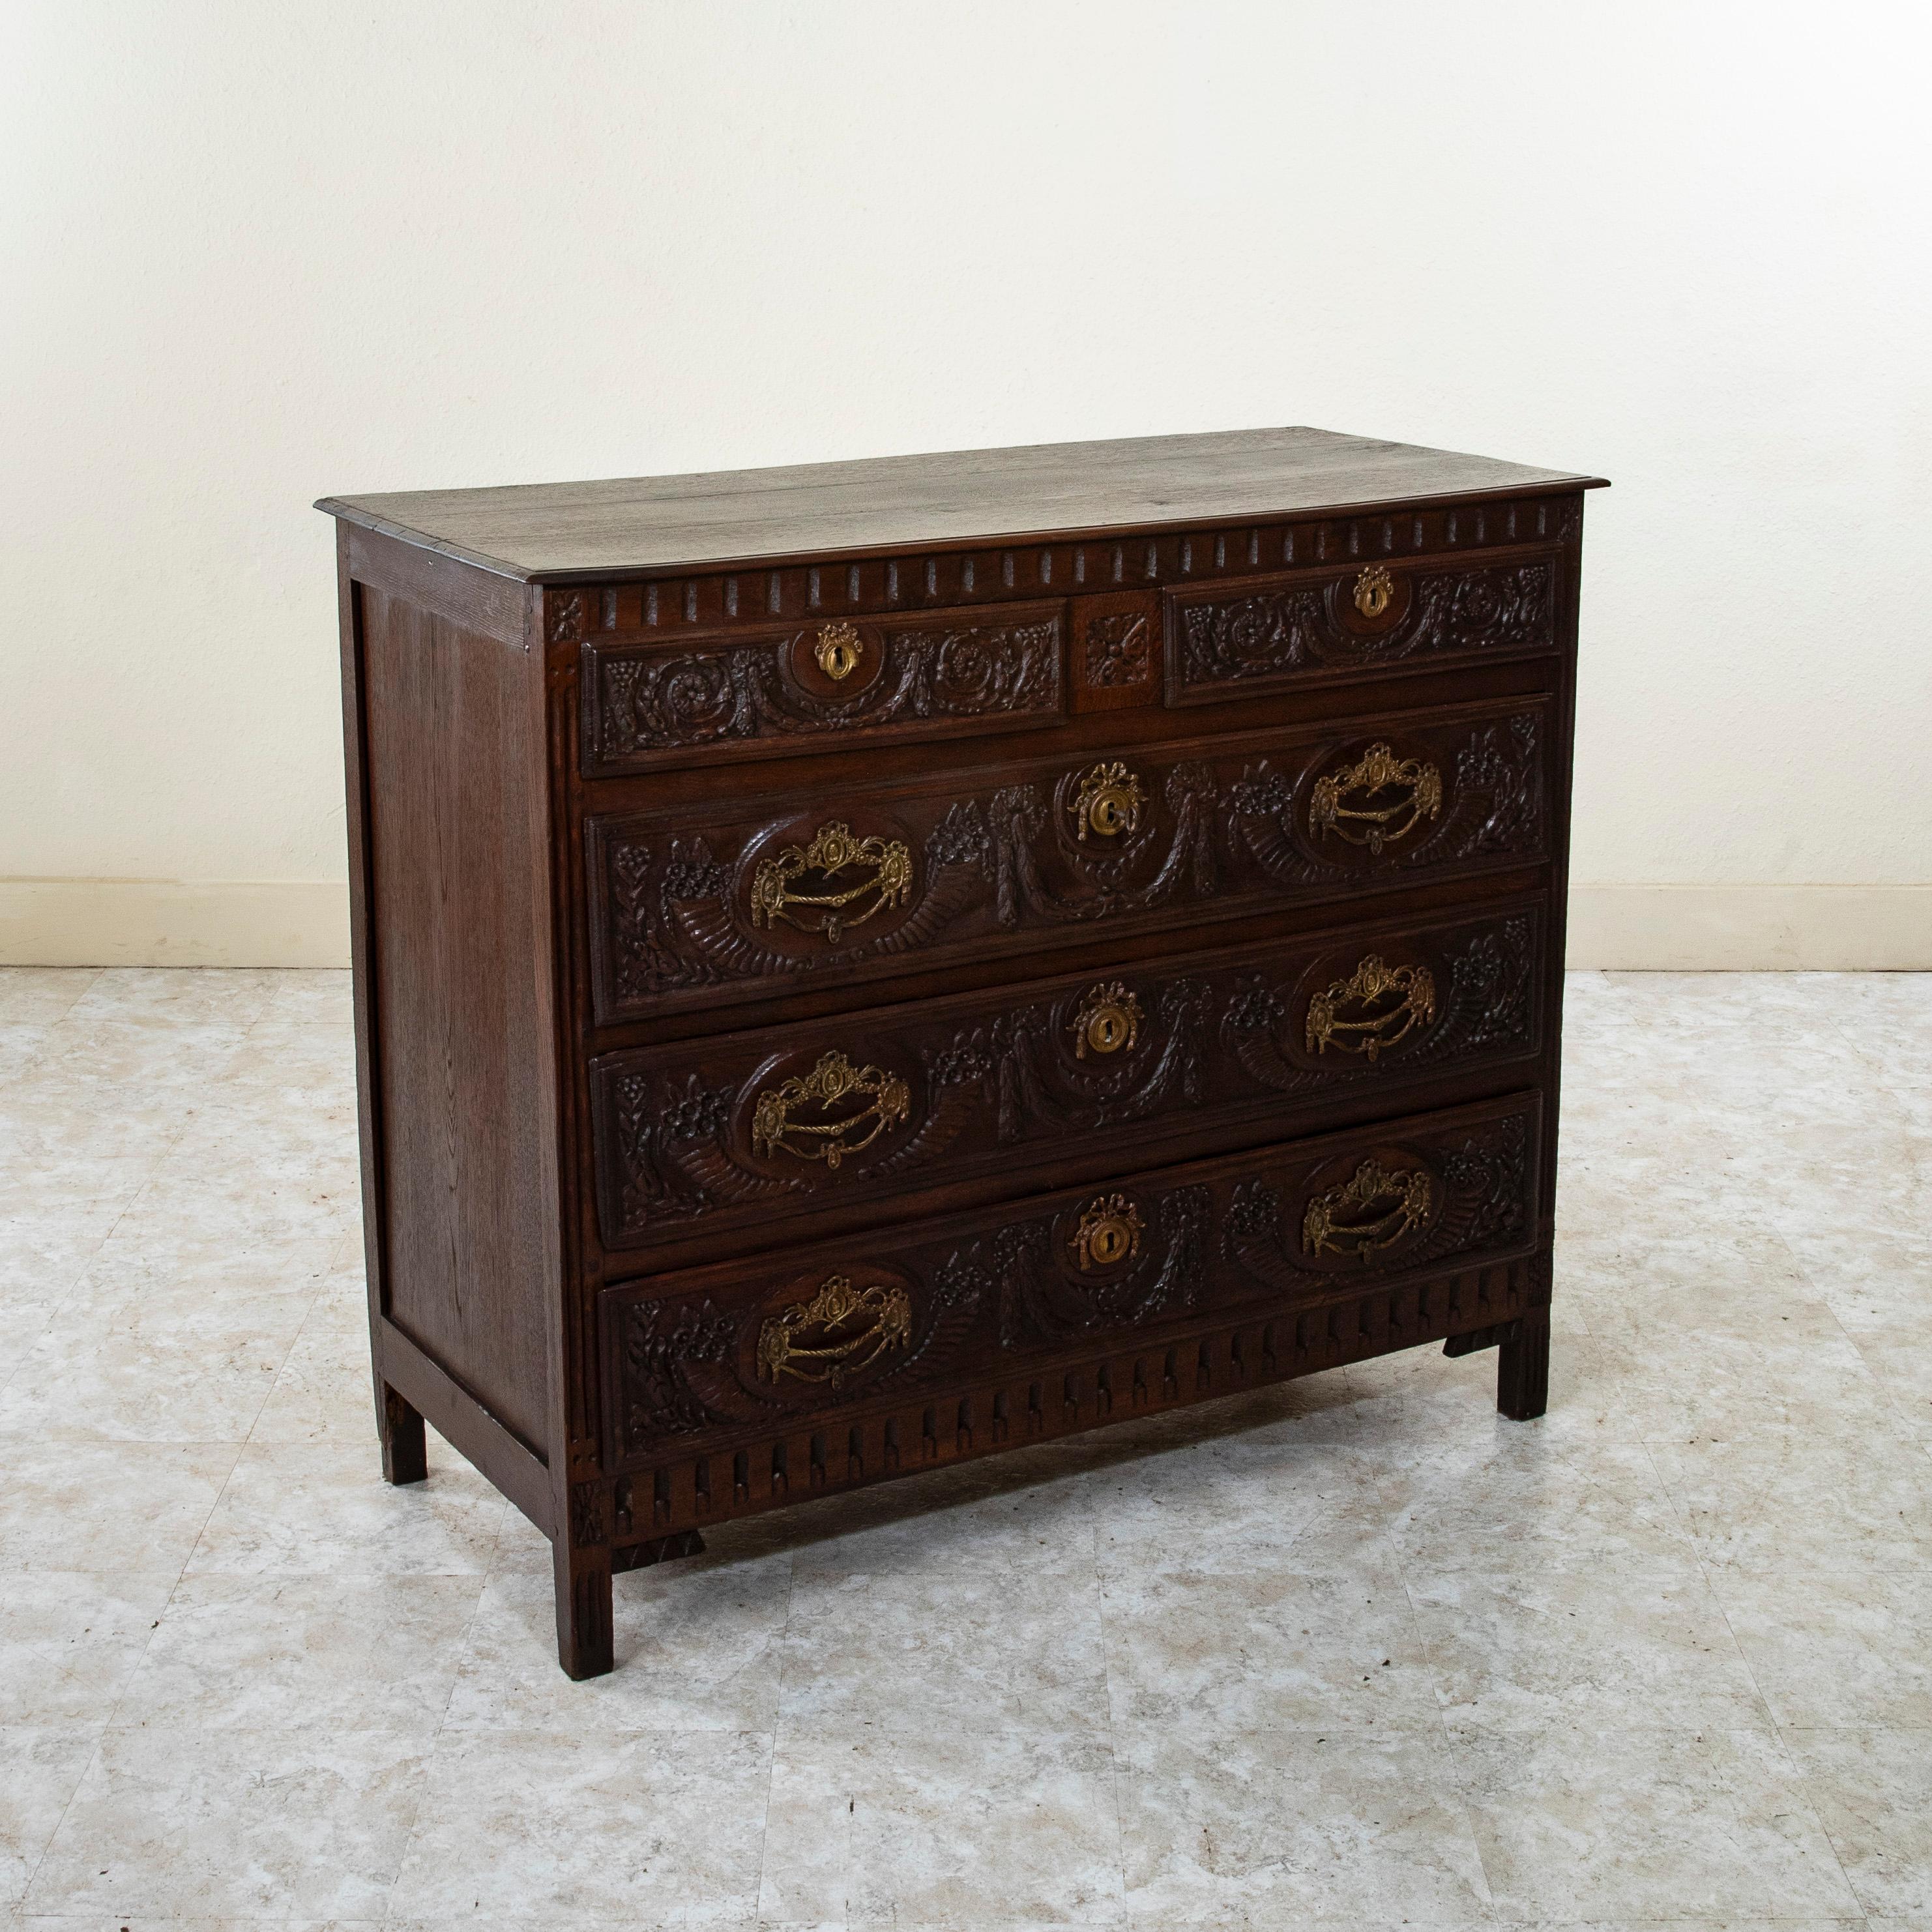 This late eighteenth century Italian oak commode or chest of drawers  features hand pegged paneled sides and drawer fronts with hand carvings of garlands and cornucopia. Its three drawers are each appointed with their original bronze drawer pulls